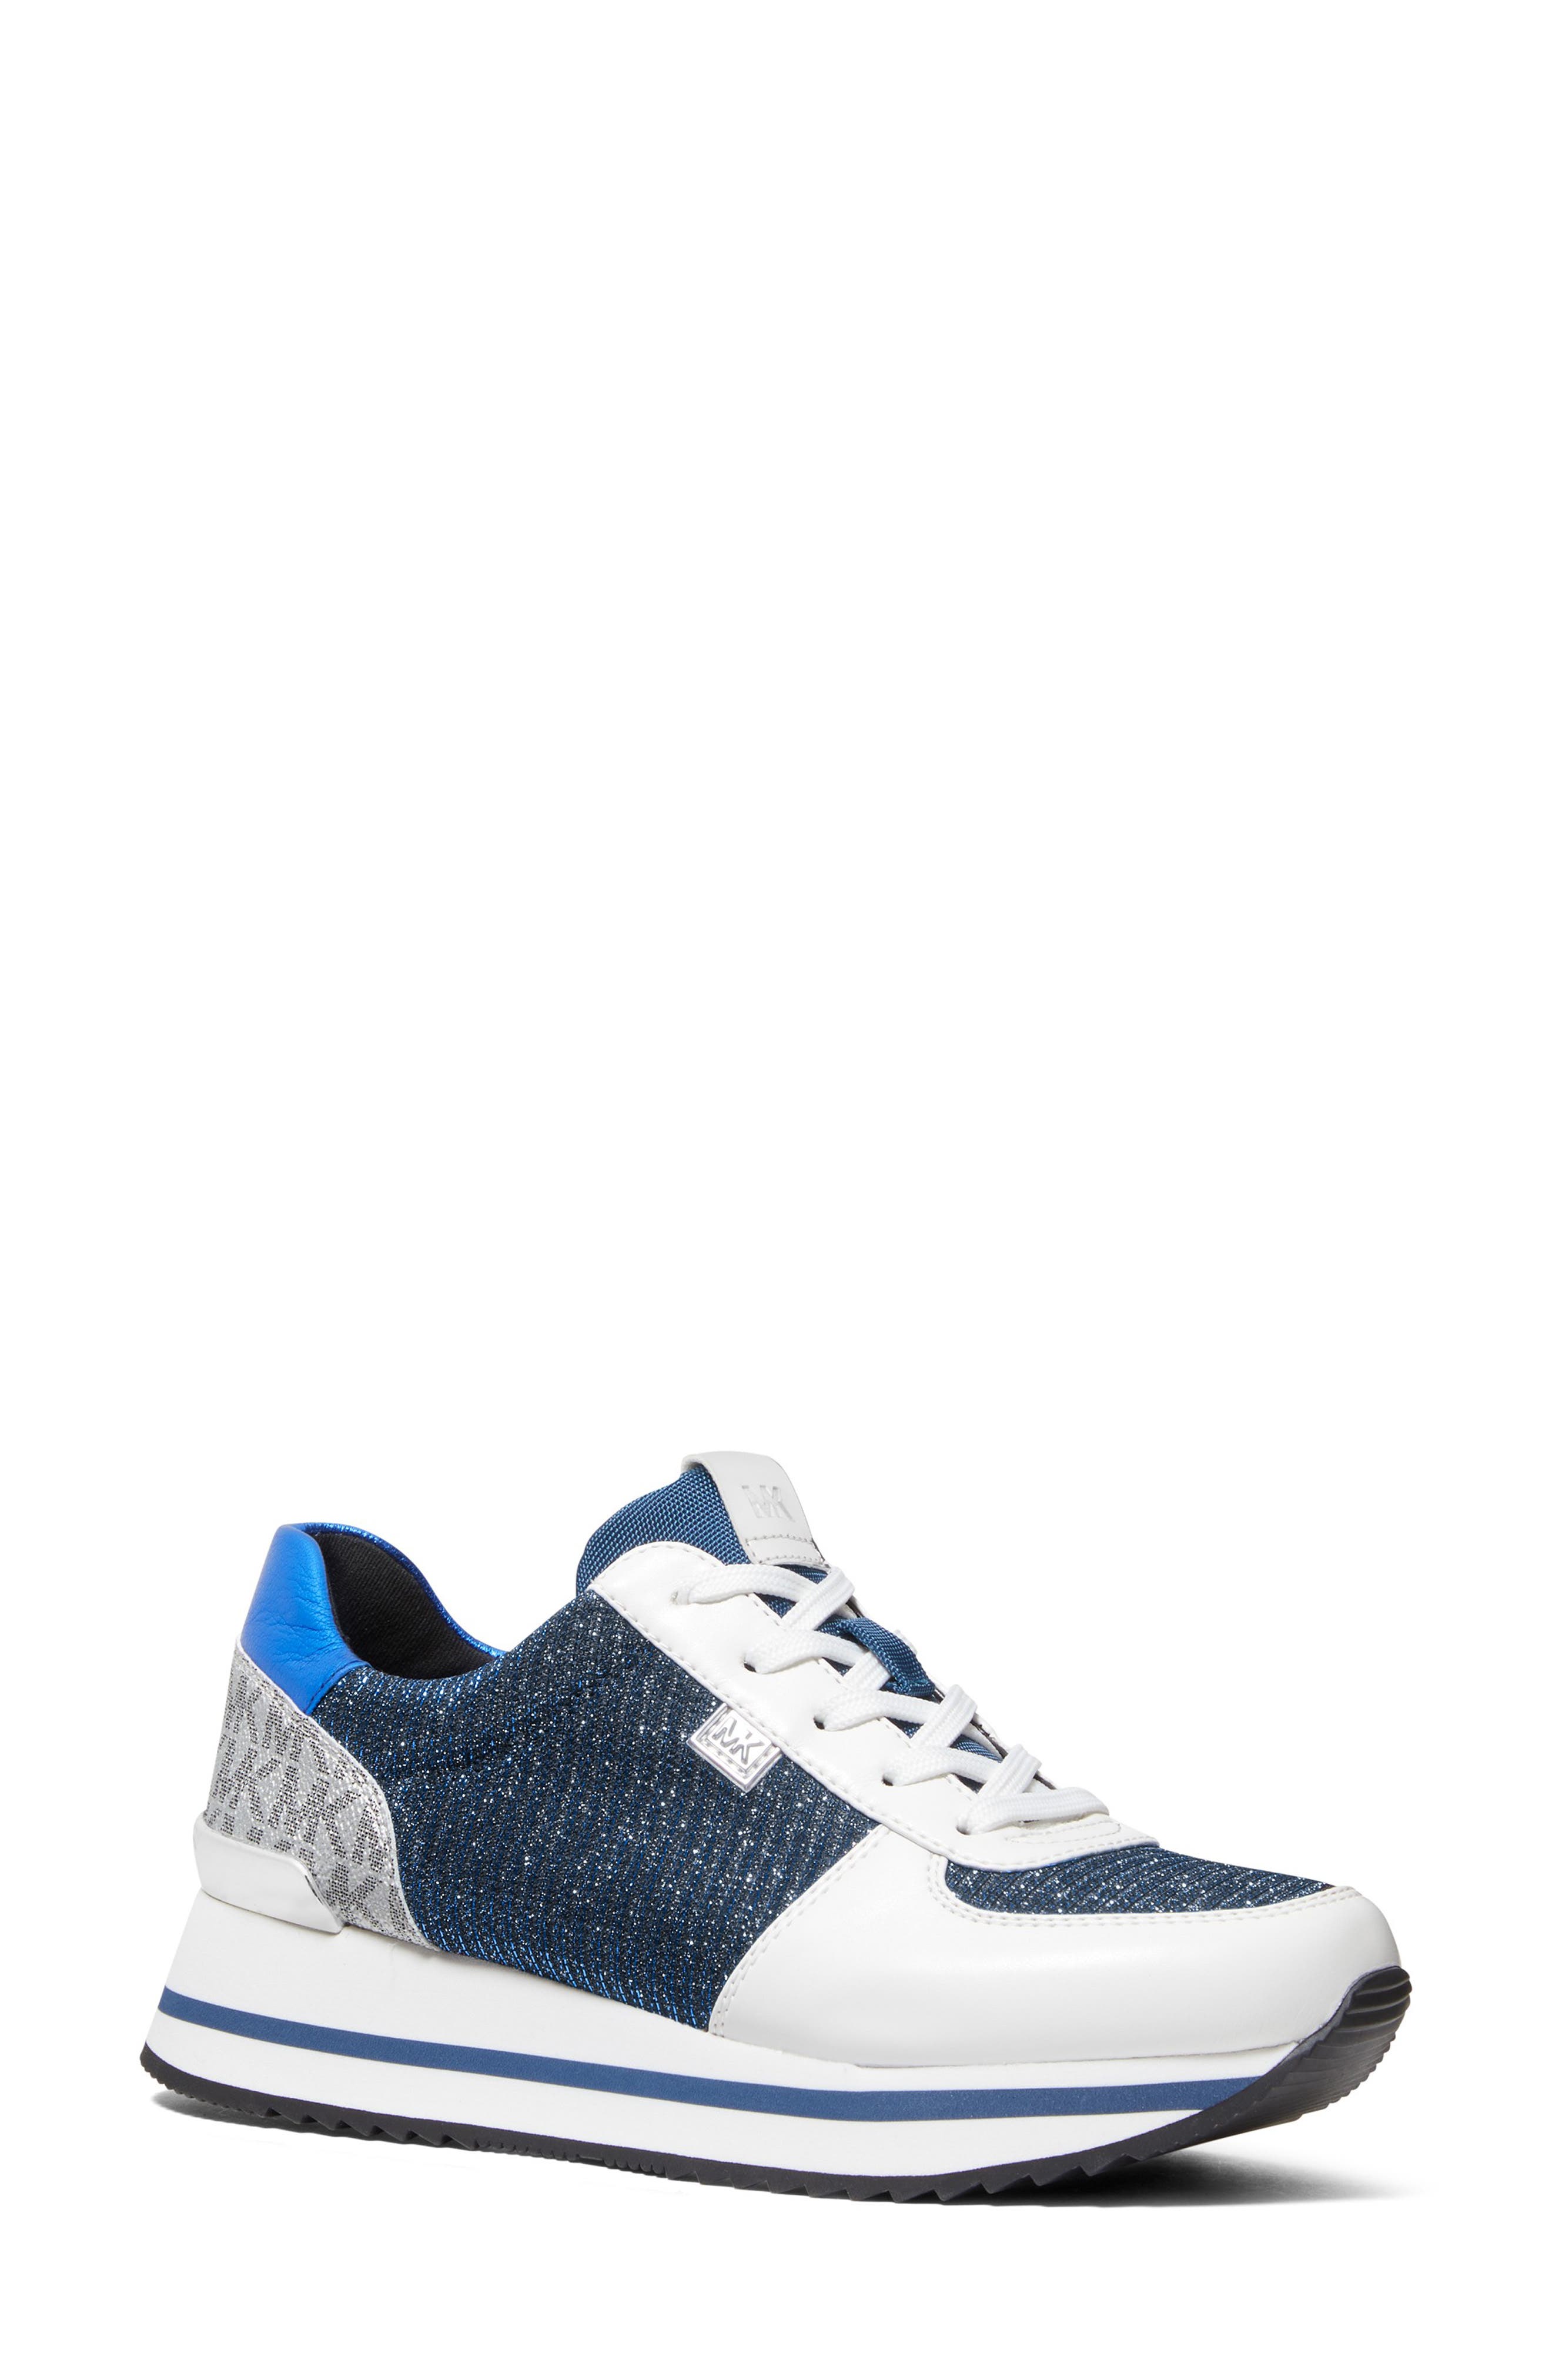 UPC 195512912016 product image for MICHAEL Michael Kors Monique Trainer Sneaker in River Blue at Nordstrom, Size 6. | upcitemdb.com